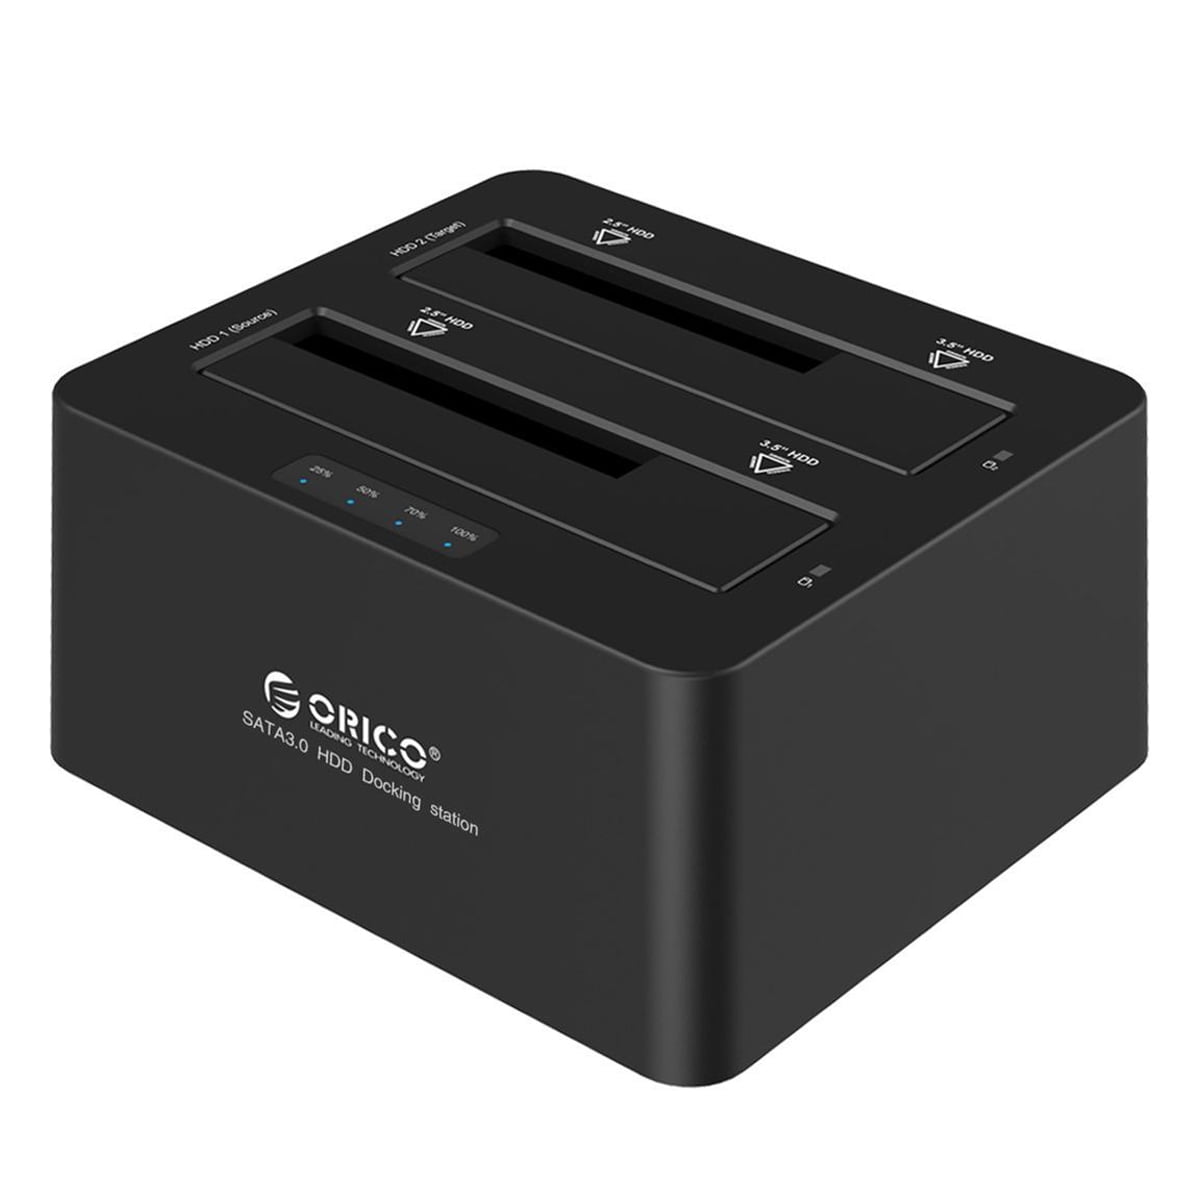 Inateck USB 3.0 Dual Bay Hard Drive Docking Station With Offline Clone Function 